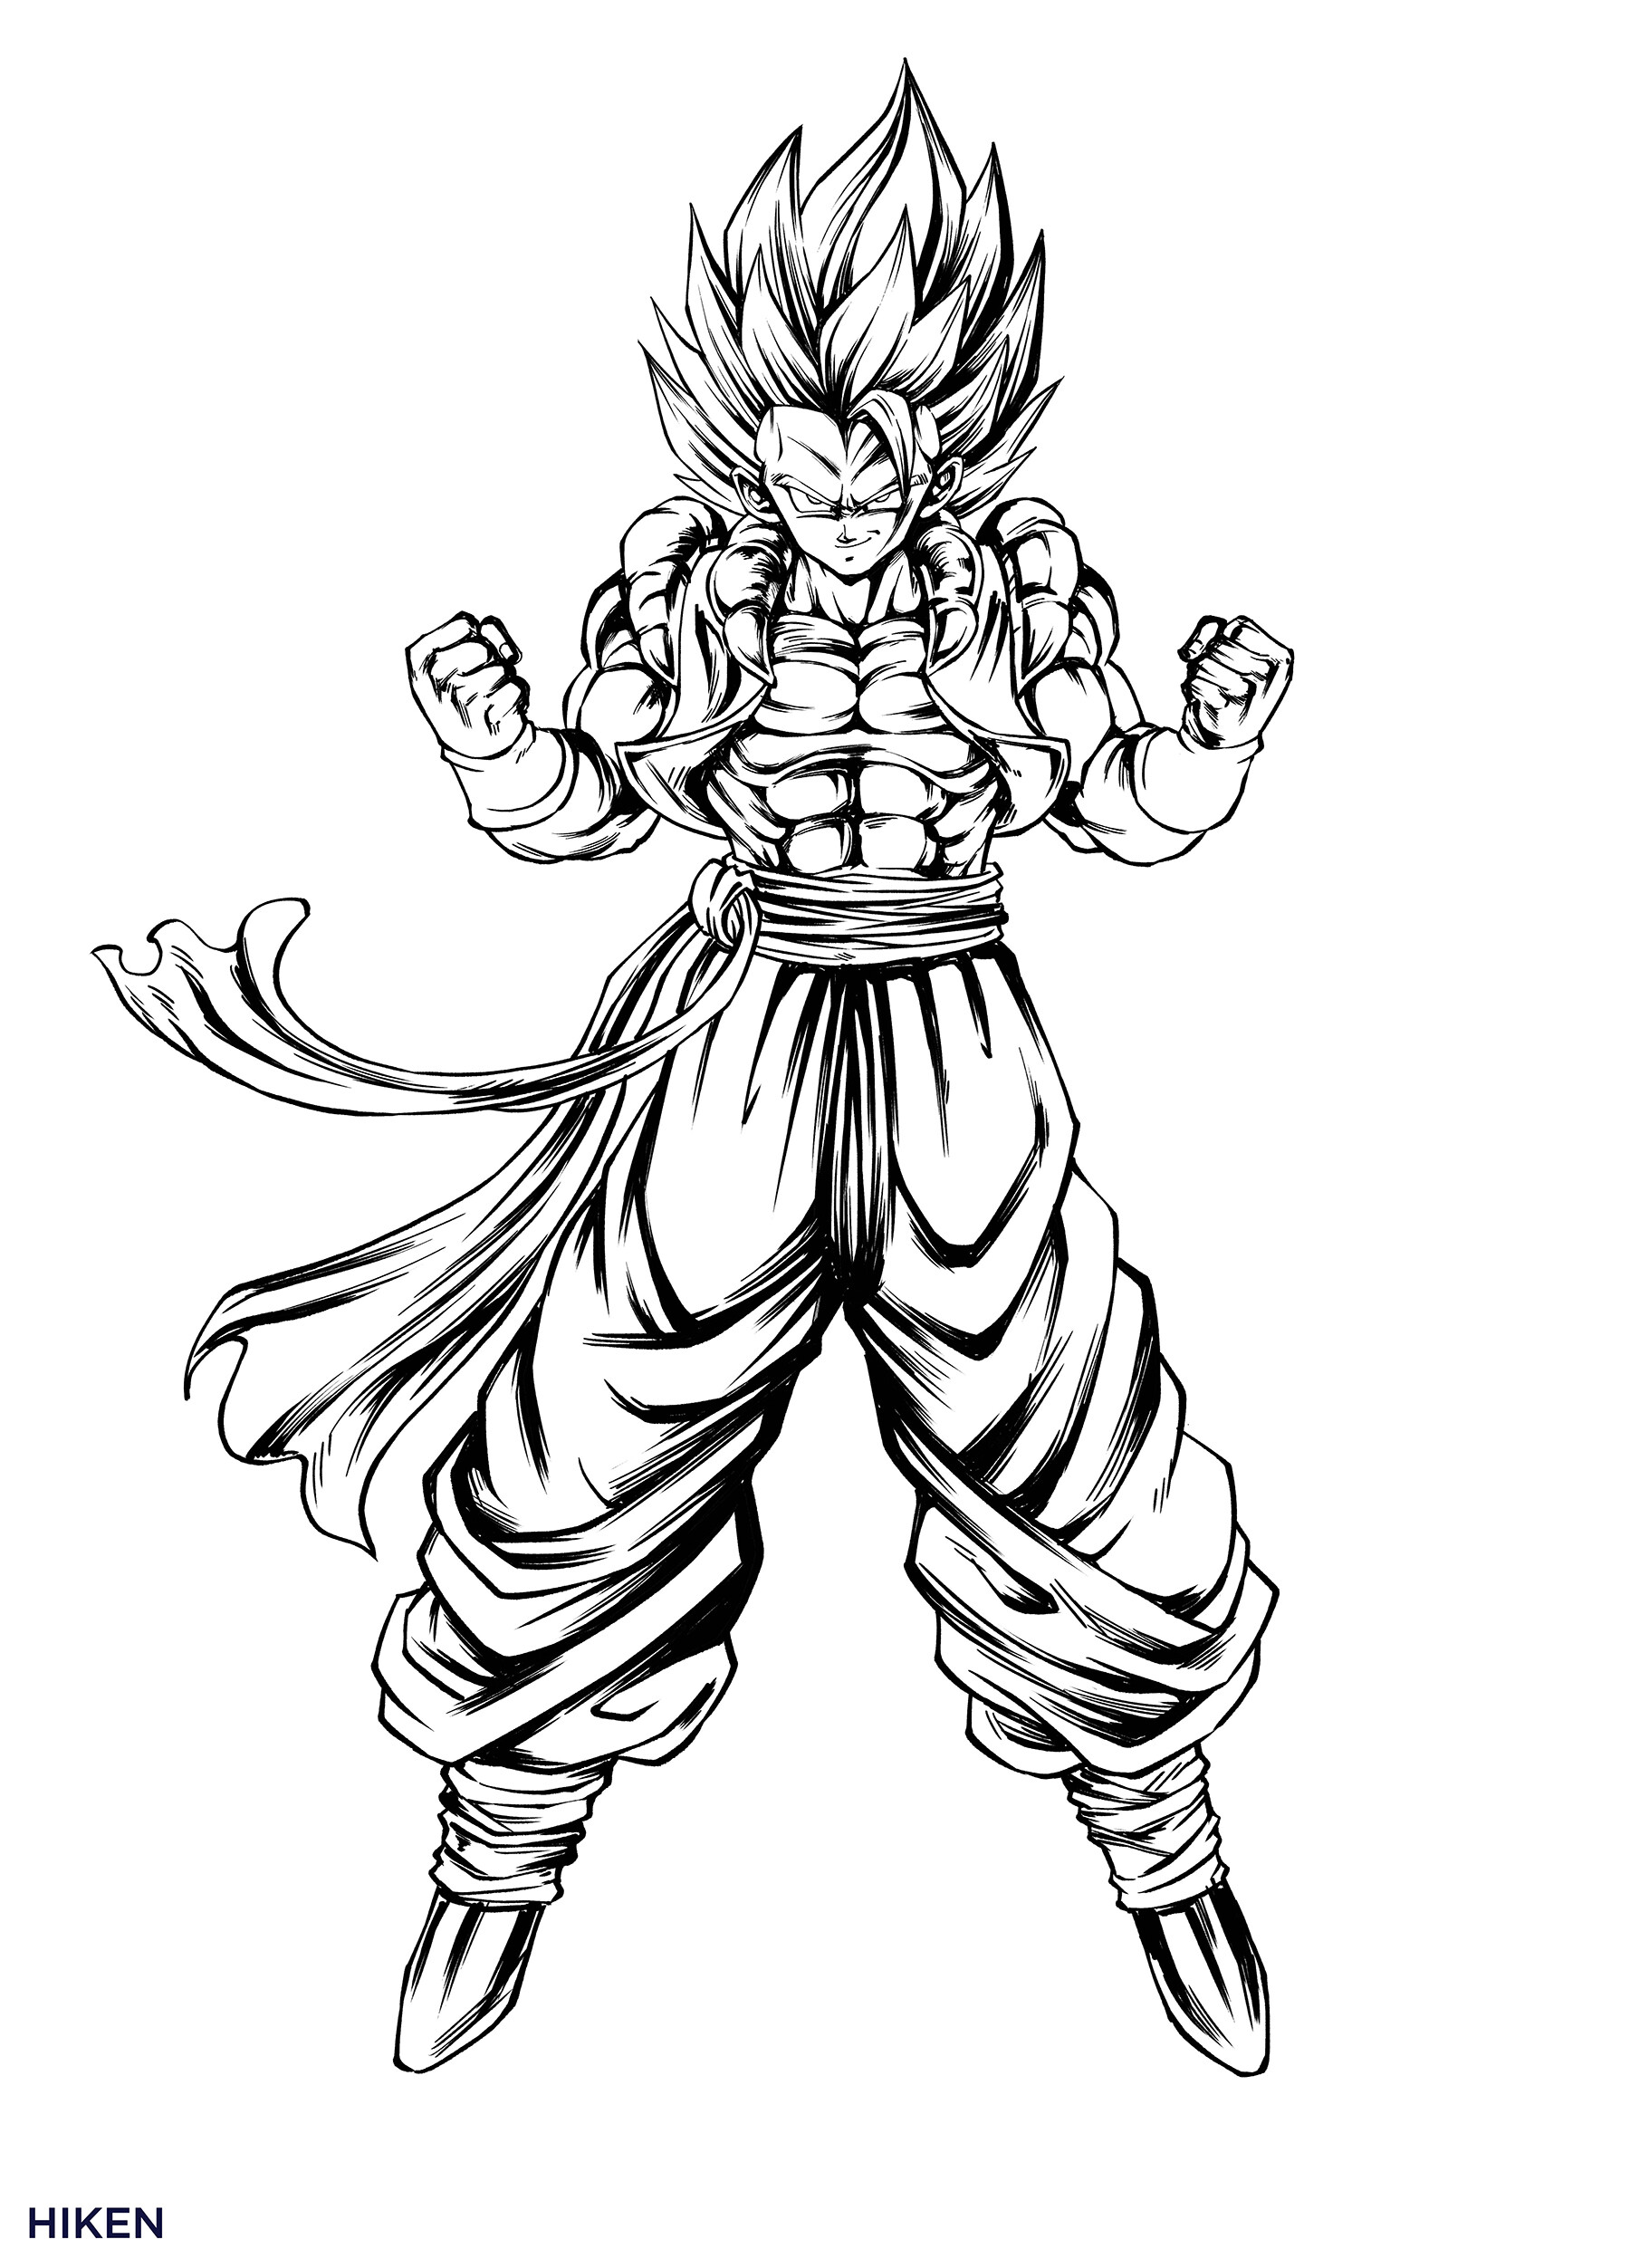 gogeta coloring pages